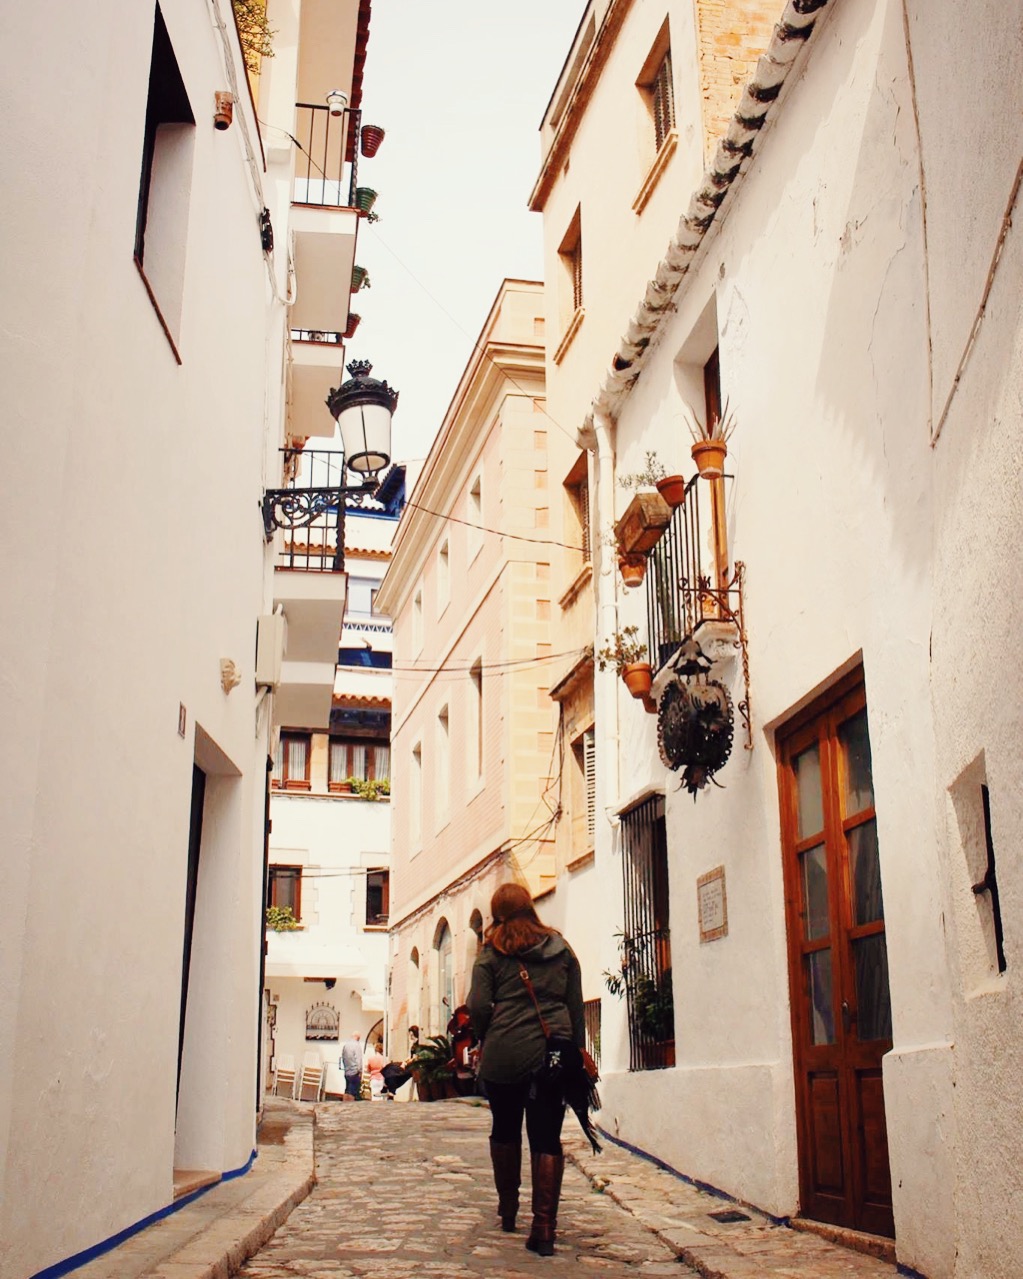 A street in Sitges Spain